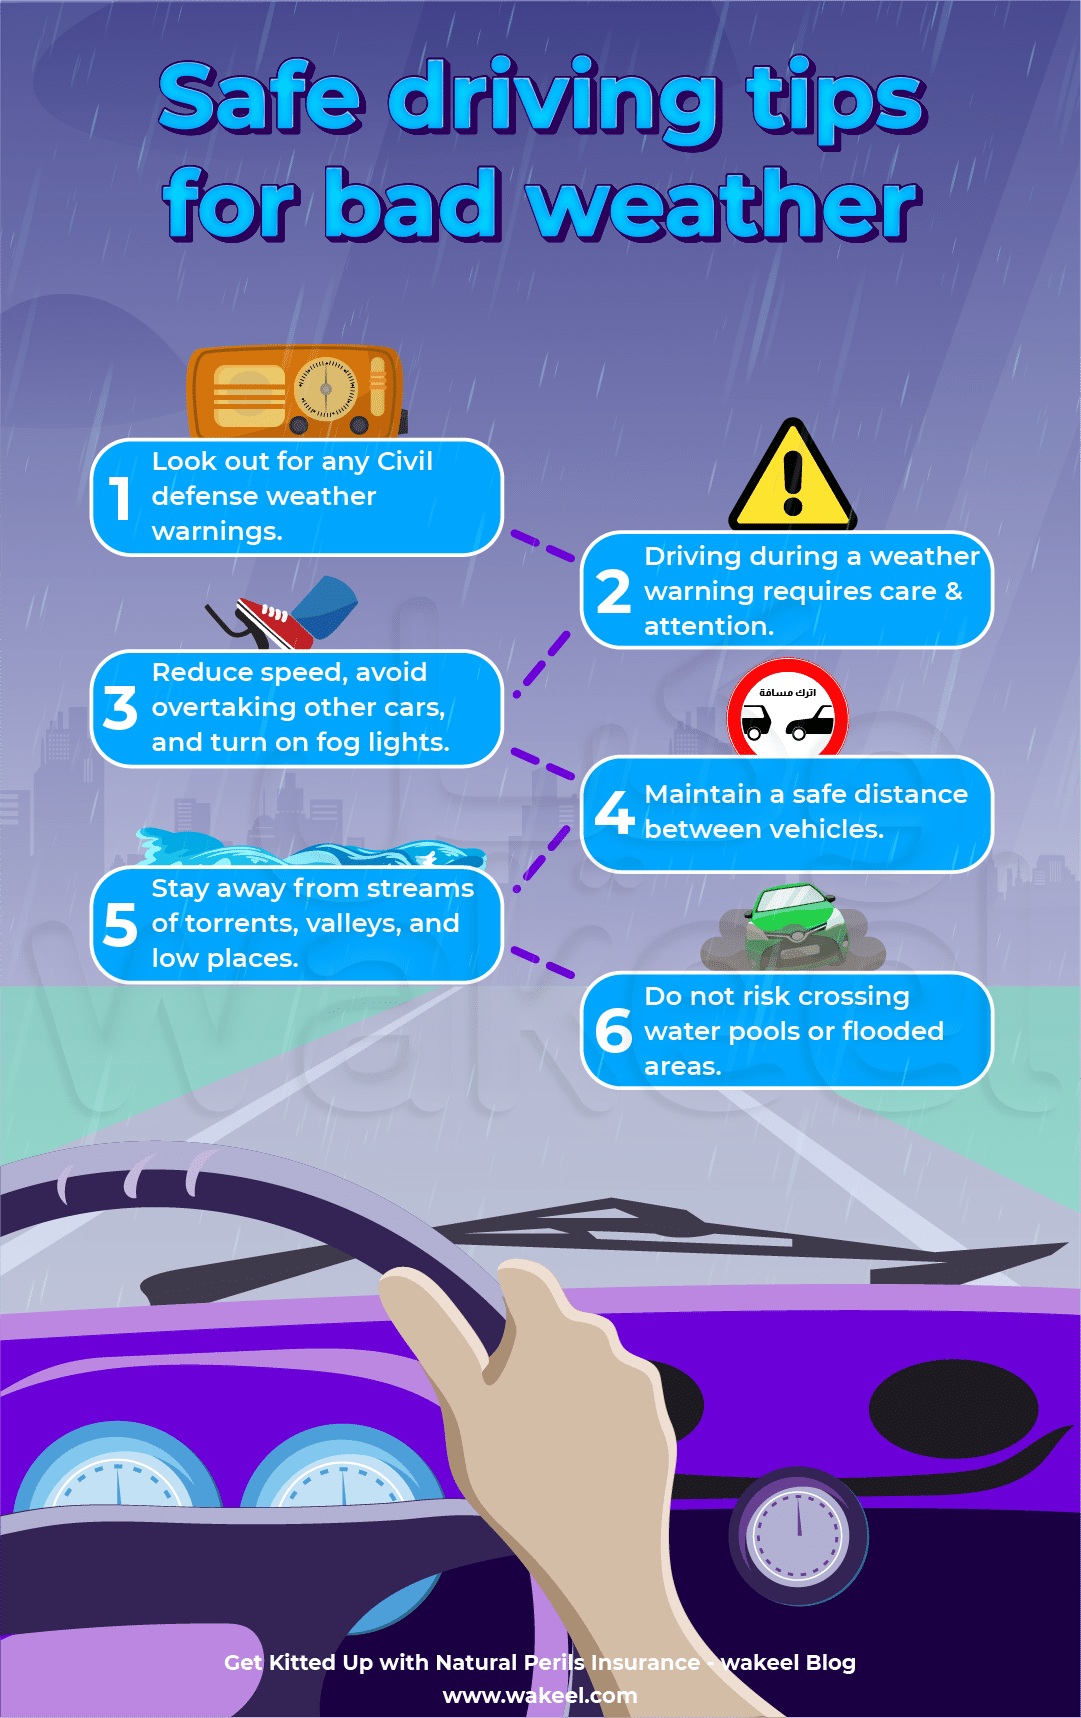 Approved tips for driving in low visibility and in bad weather